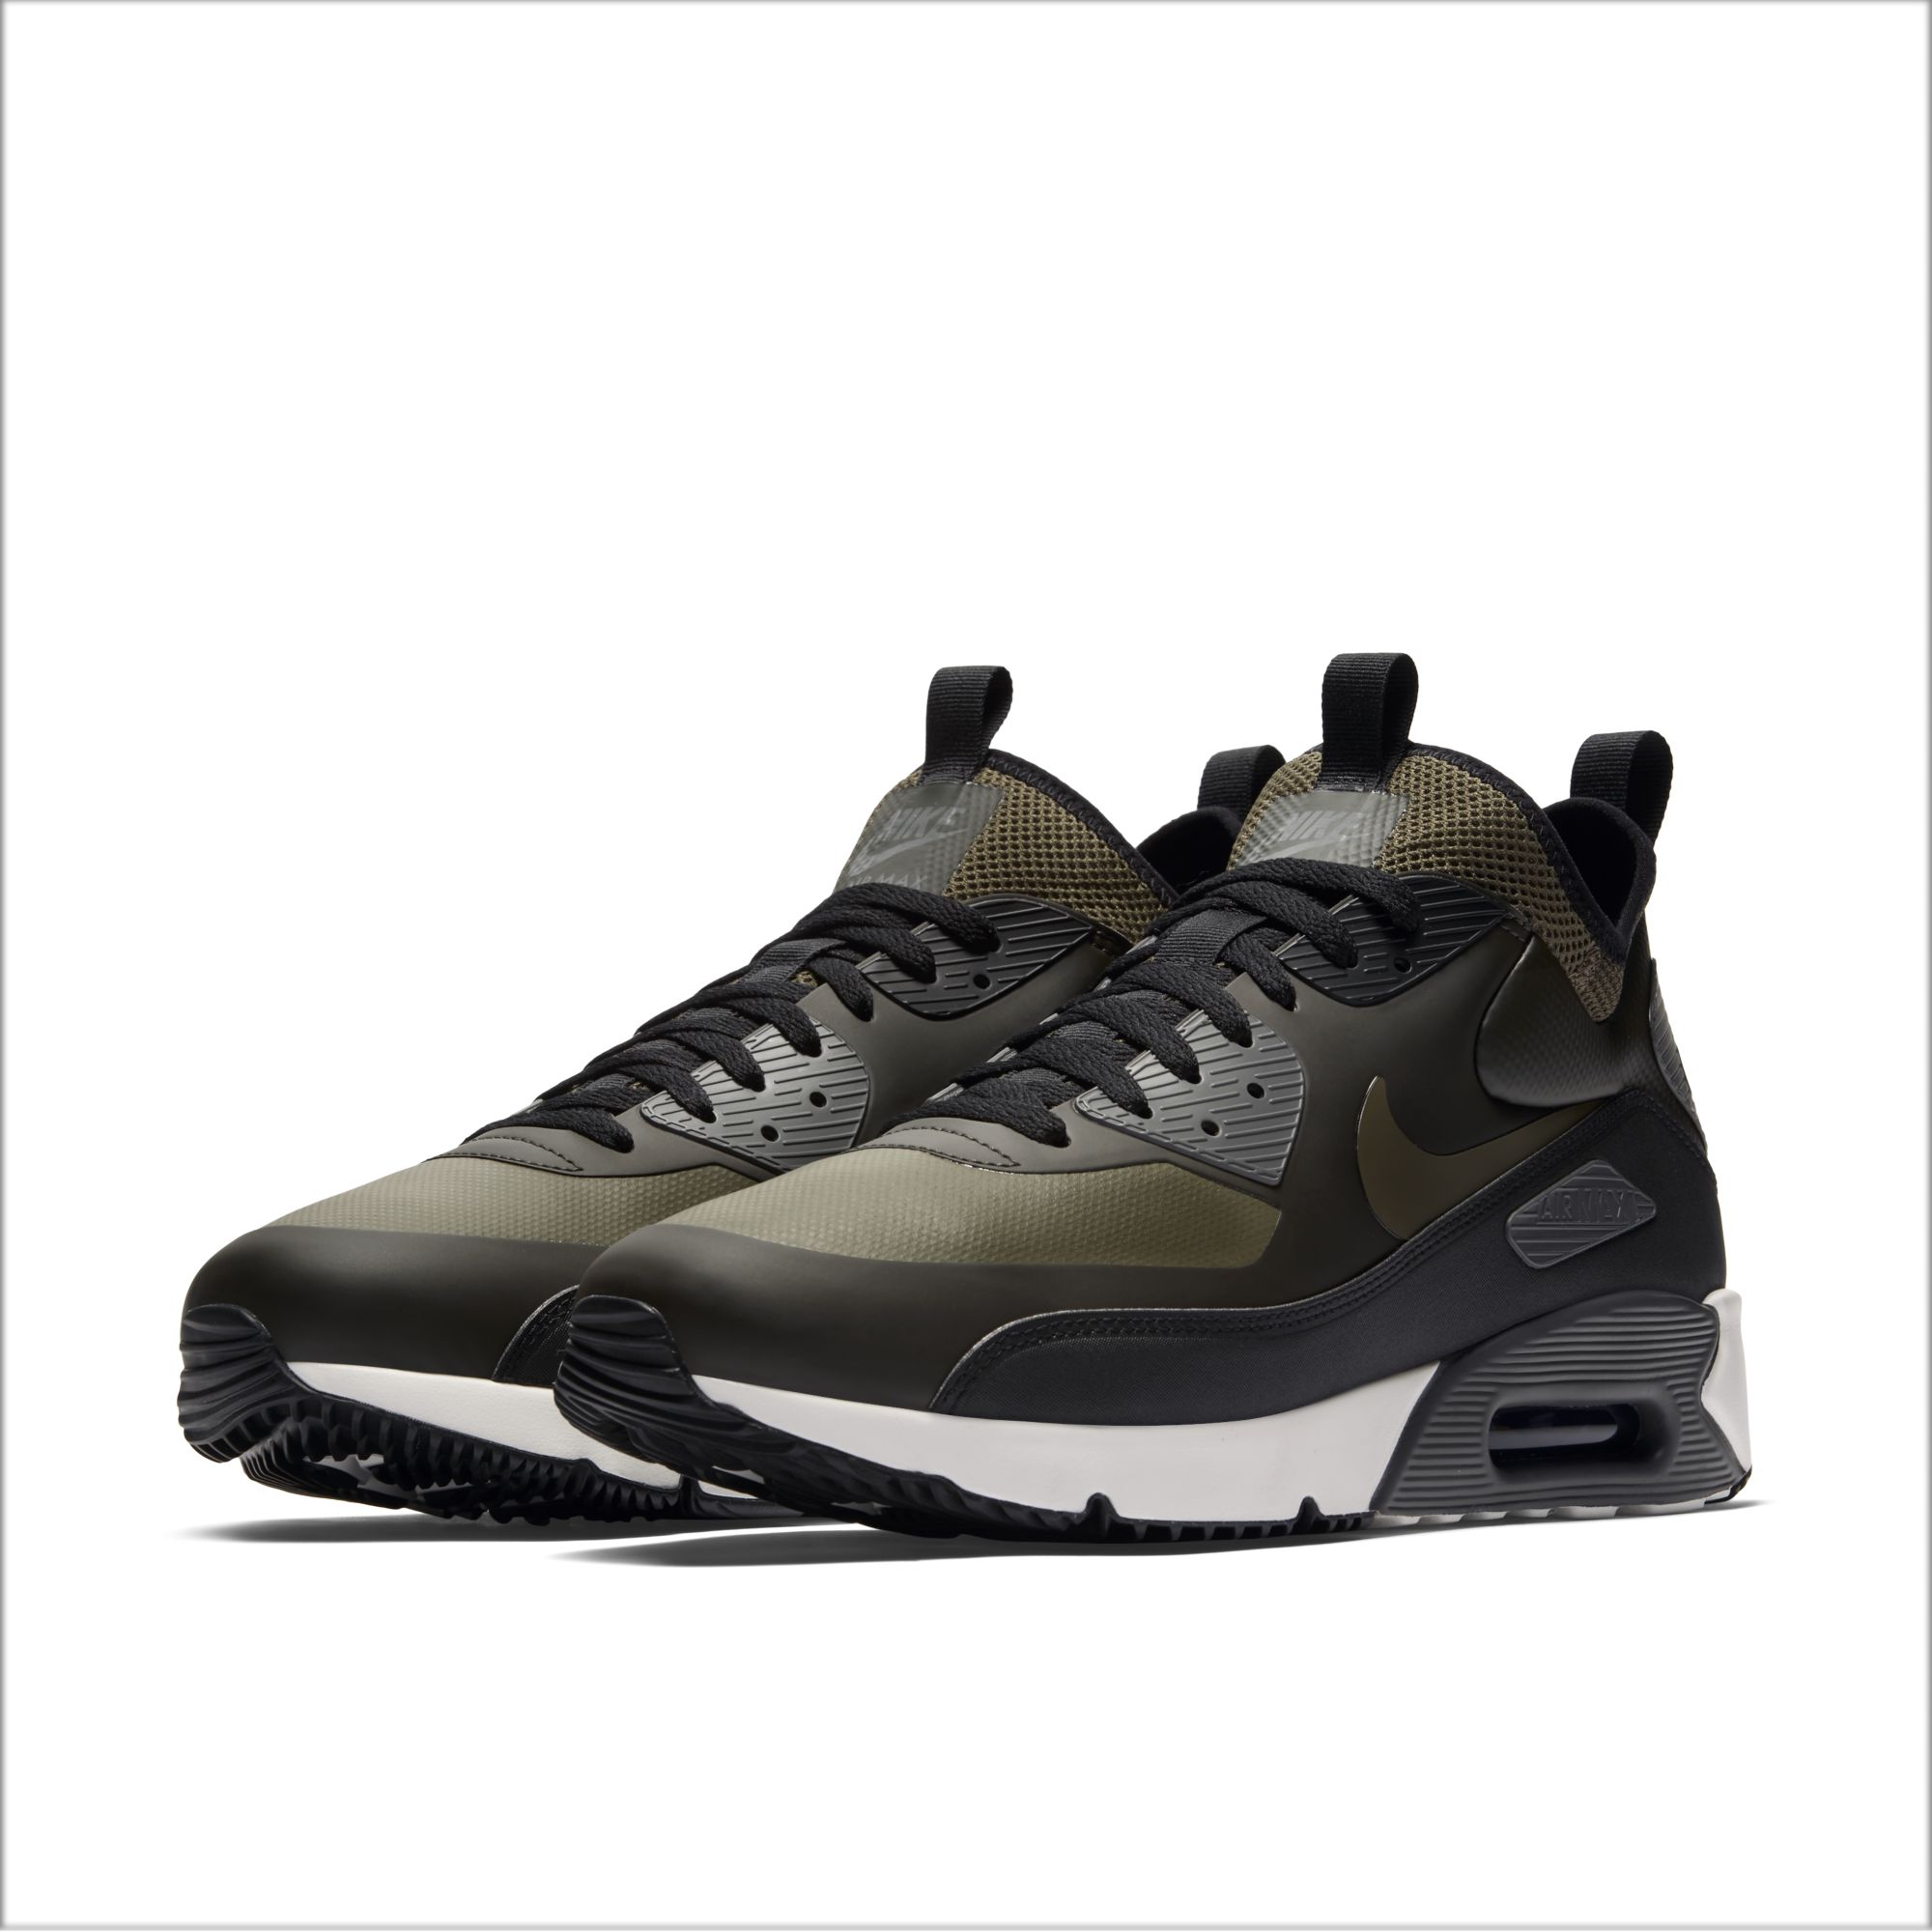 avance Comparable Presa These Nike Air Max 90 Ultra Mids Get Ready for Winter - WearTesters